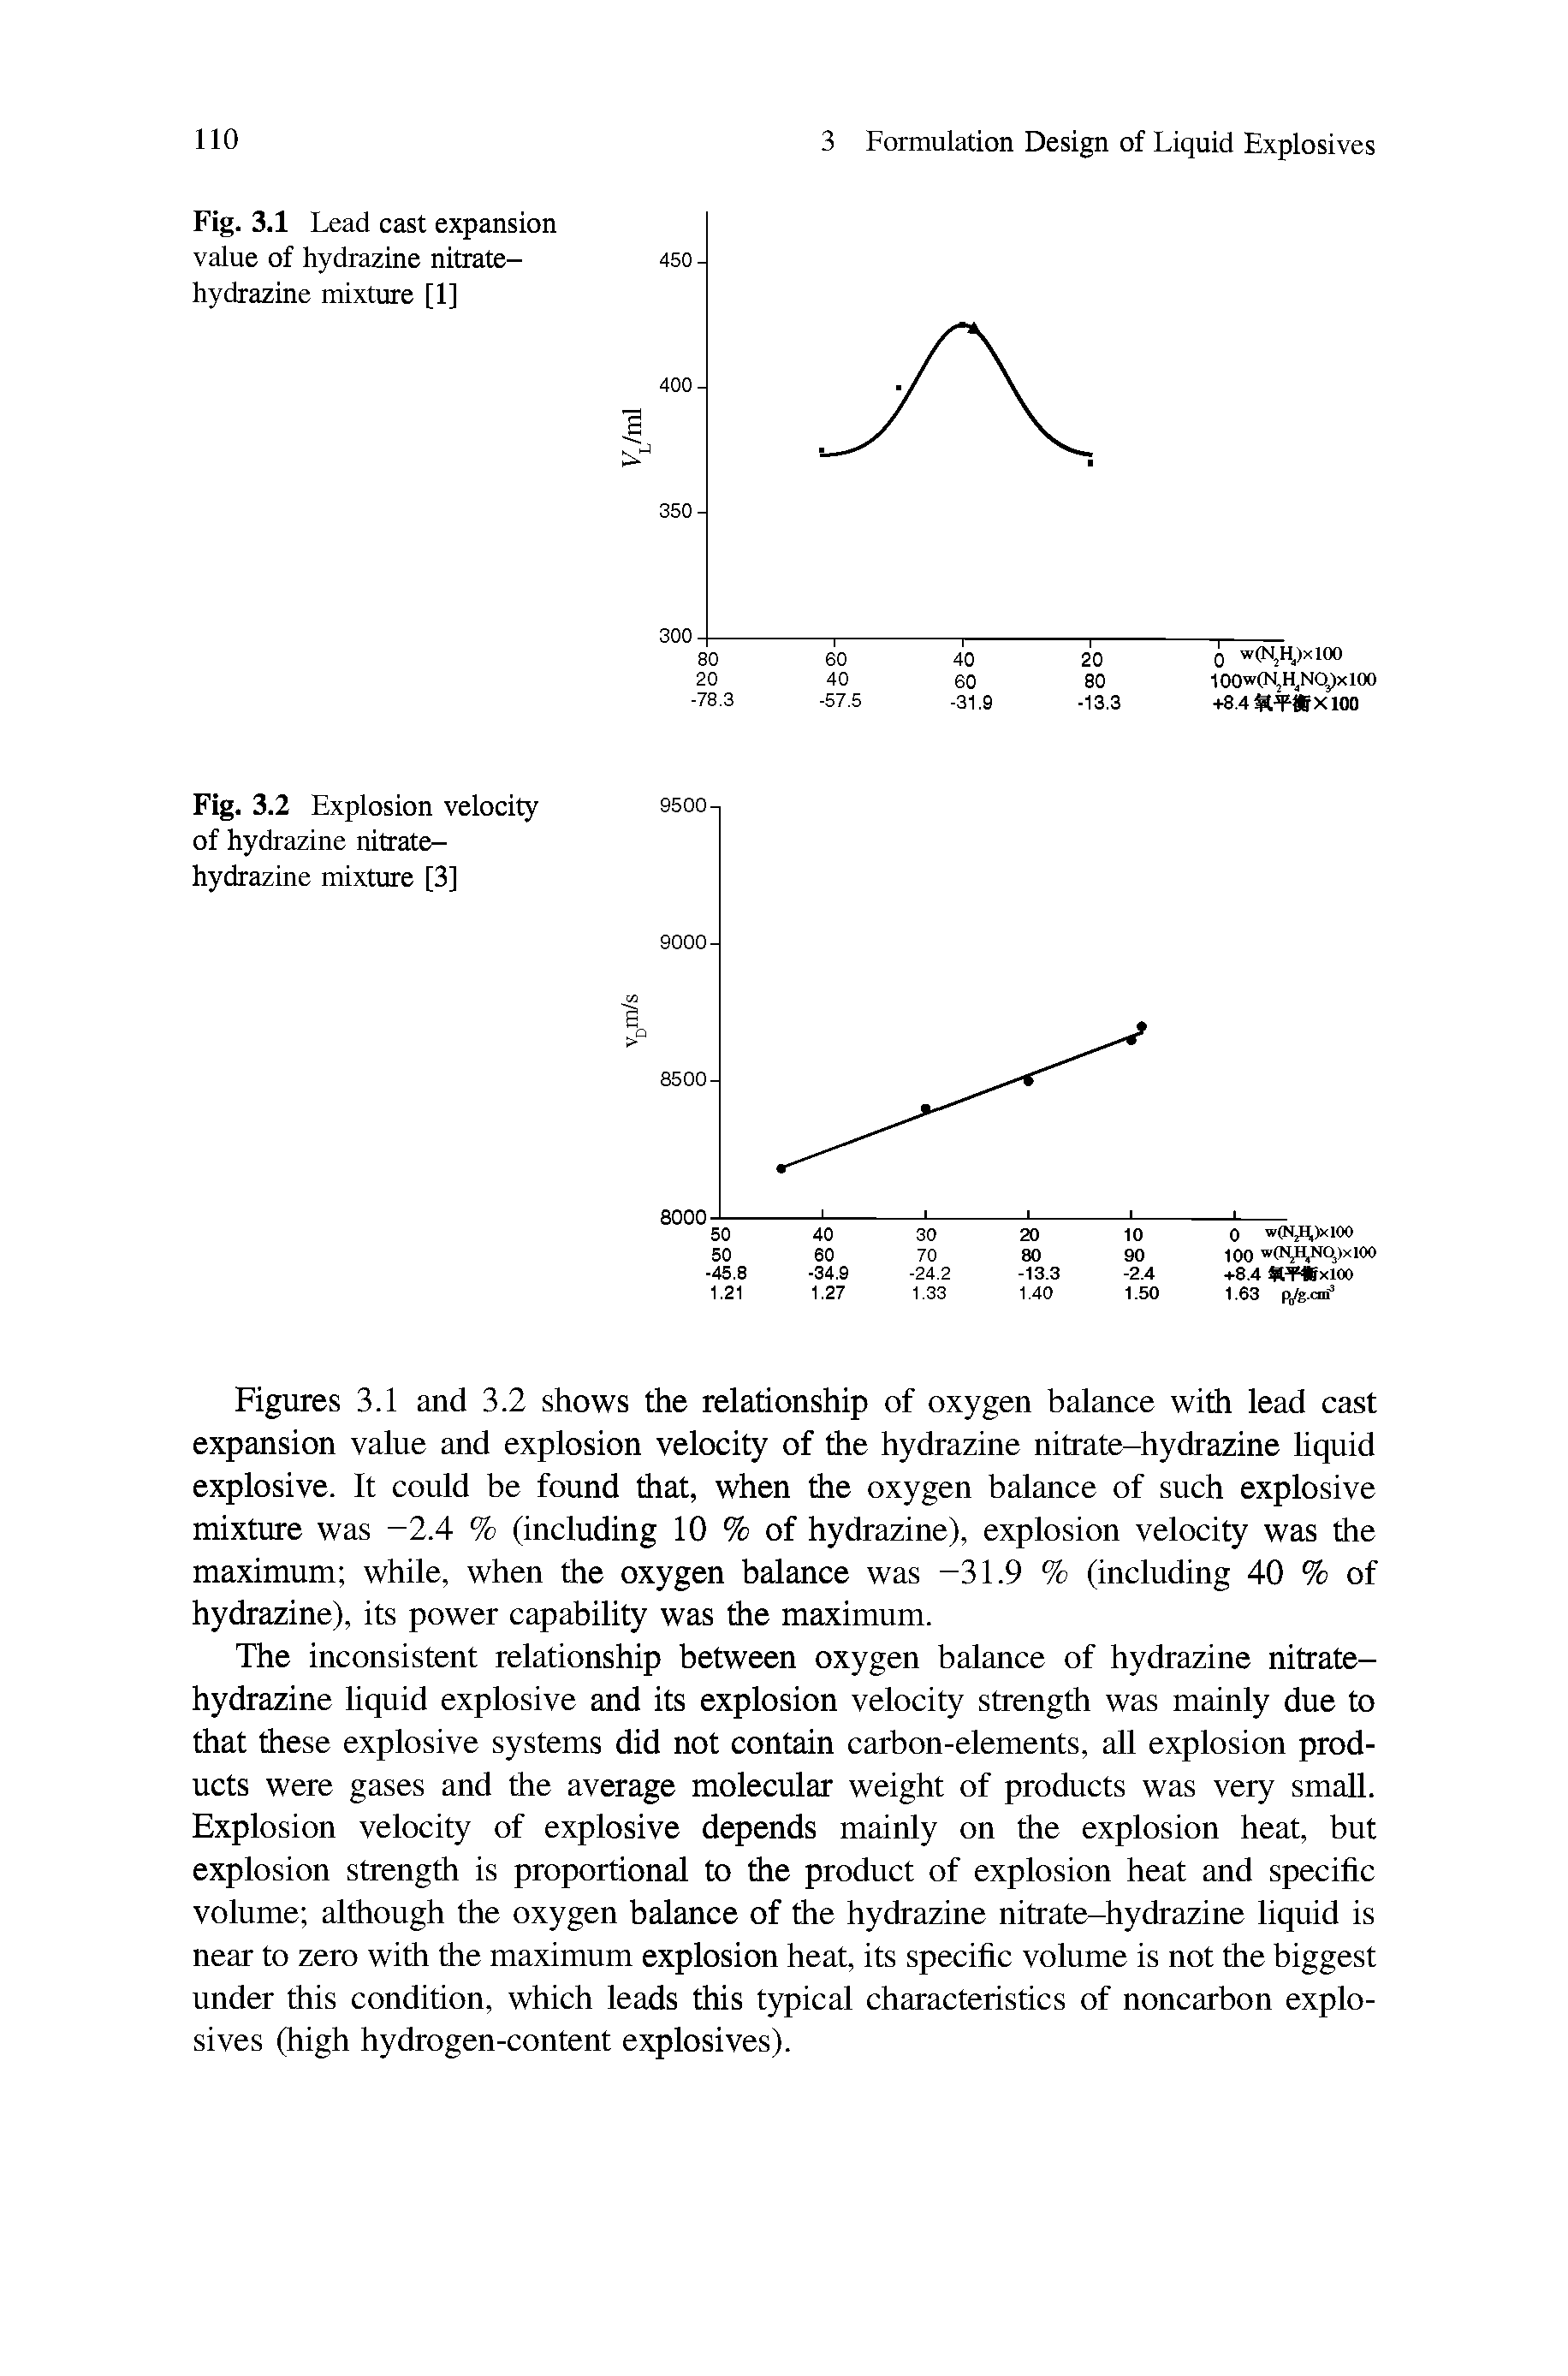 Figures 3.1 and 3.2 shows the relationship of oxygen balance with lead cast expansion value and explosion velocity of the hydrazine nitrate-hydrazine liquid explosive. It could be found that, when the oxygen balance of such explosive mixture was -2.4 % (including 10 % of hydrazine), explosion velocity was the maximum while, when the oxygen balance was -31.9 % (including 40 % of hydrazine), its power capability was the maximum.